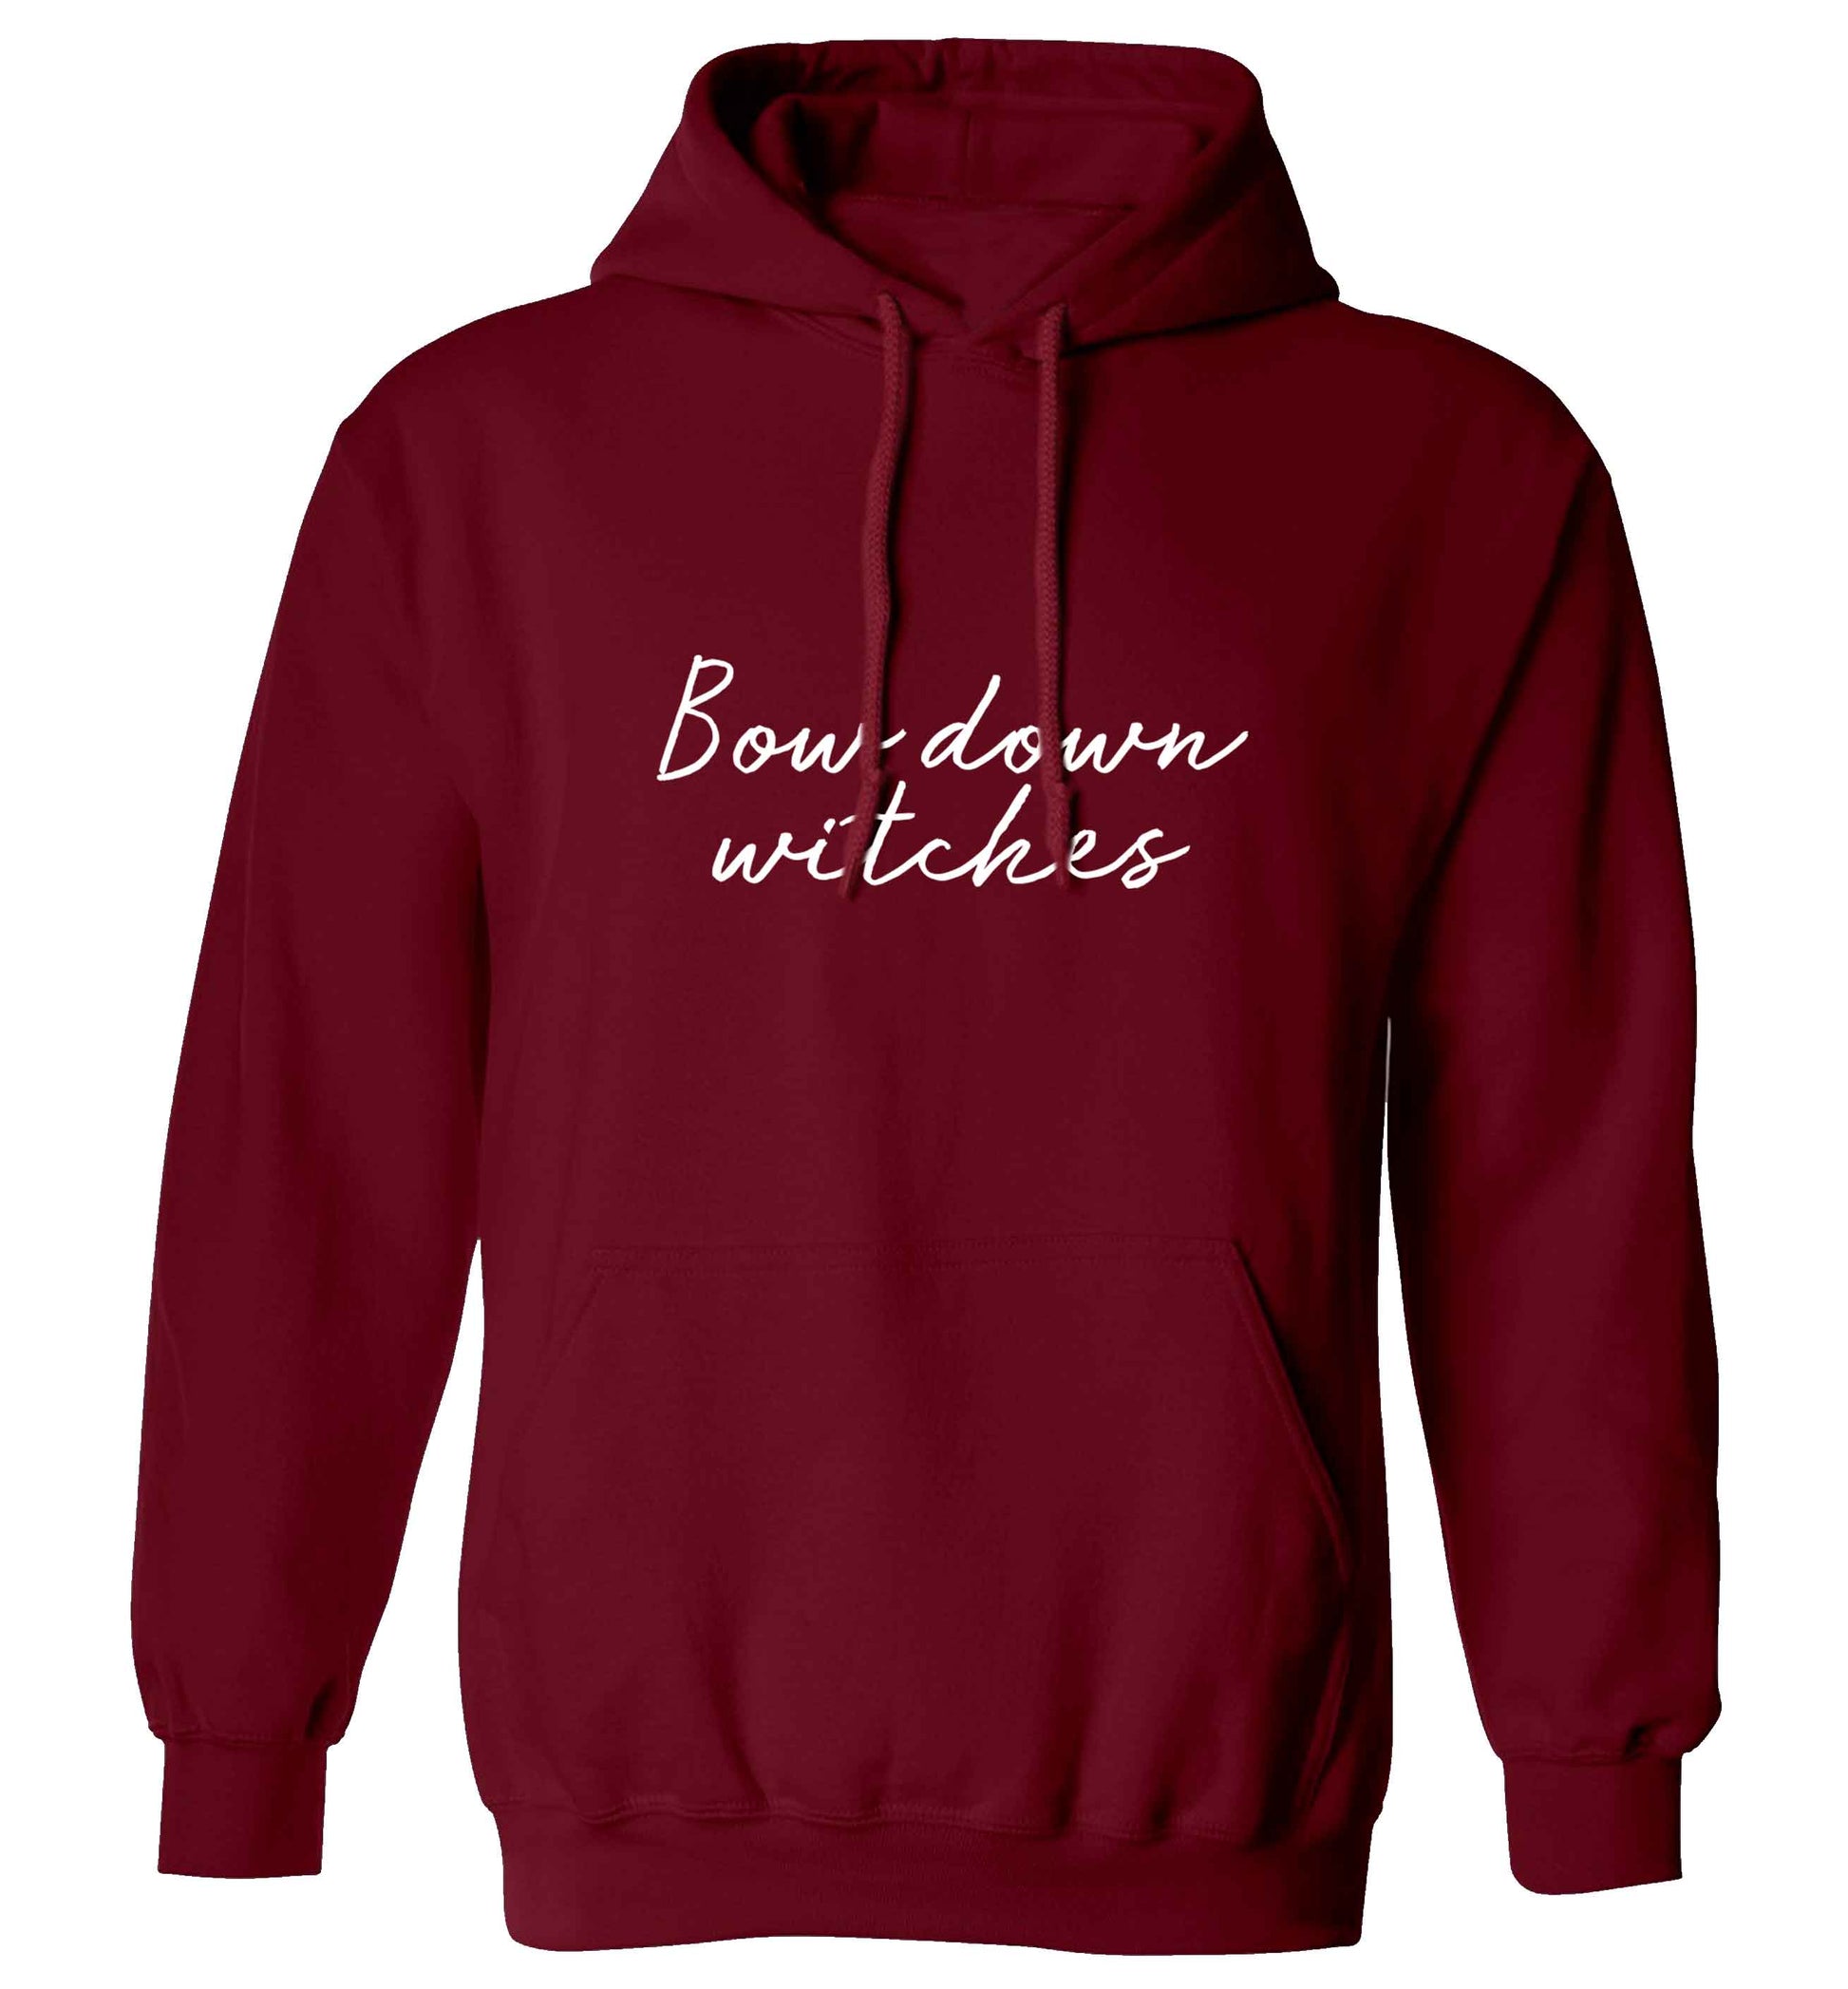 Bow down witches adults unisex maroon hoodie 2XL